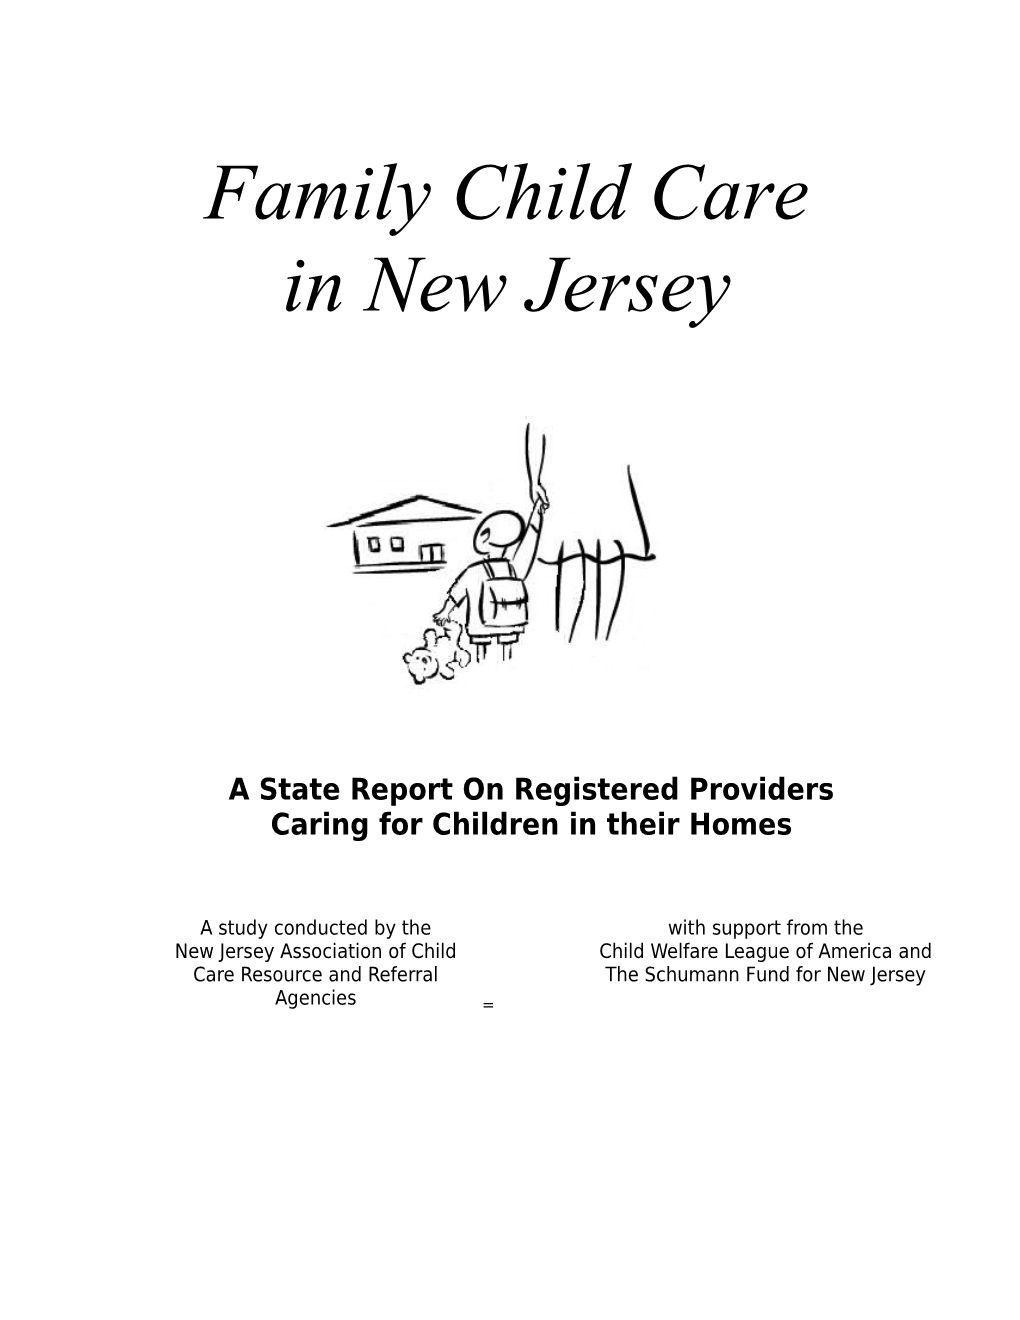 The New Jersey Association of Child Care Resource and Referral Agencies (NJACCRRA) Would